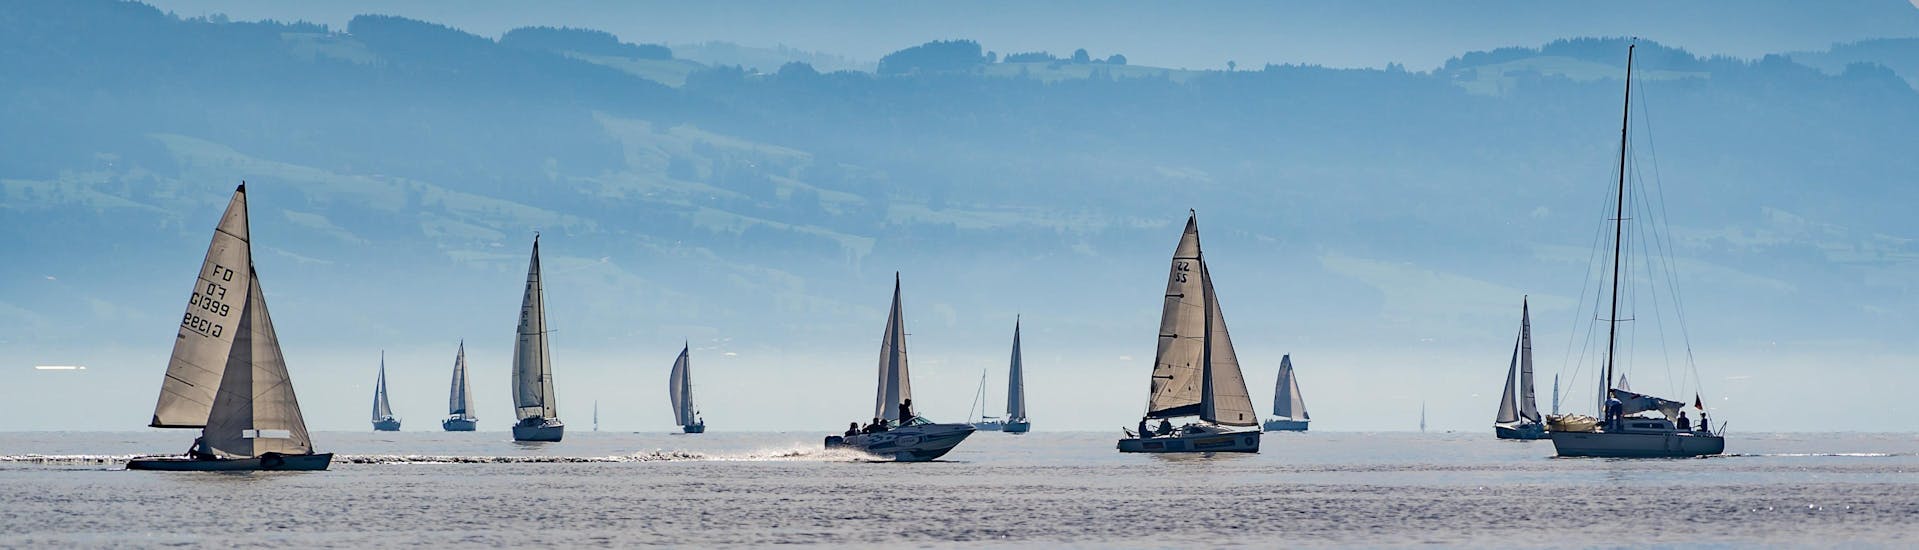 Sailboats are sailing over Lake Constance, the perfect location for doing boat trips.